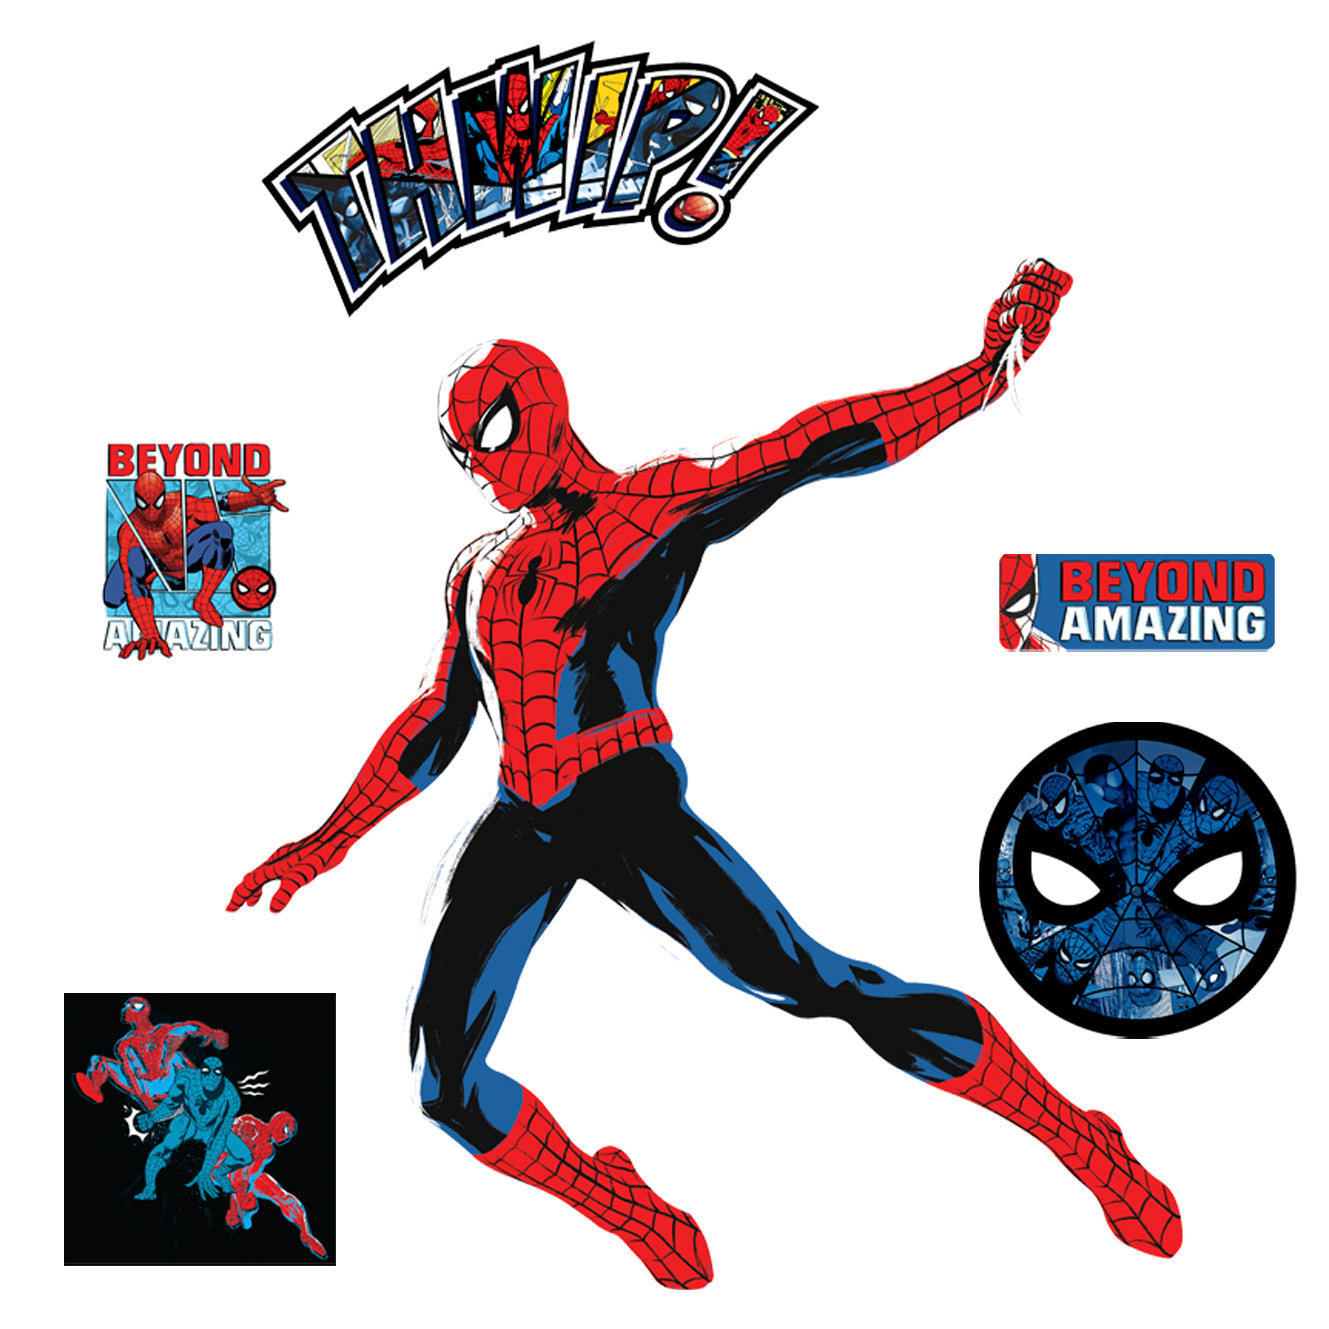 Spider-Man: Comics Badge Mural - Officially Licensed Marvel Removable